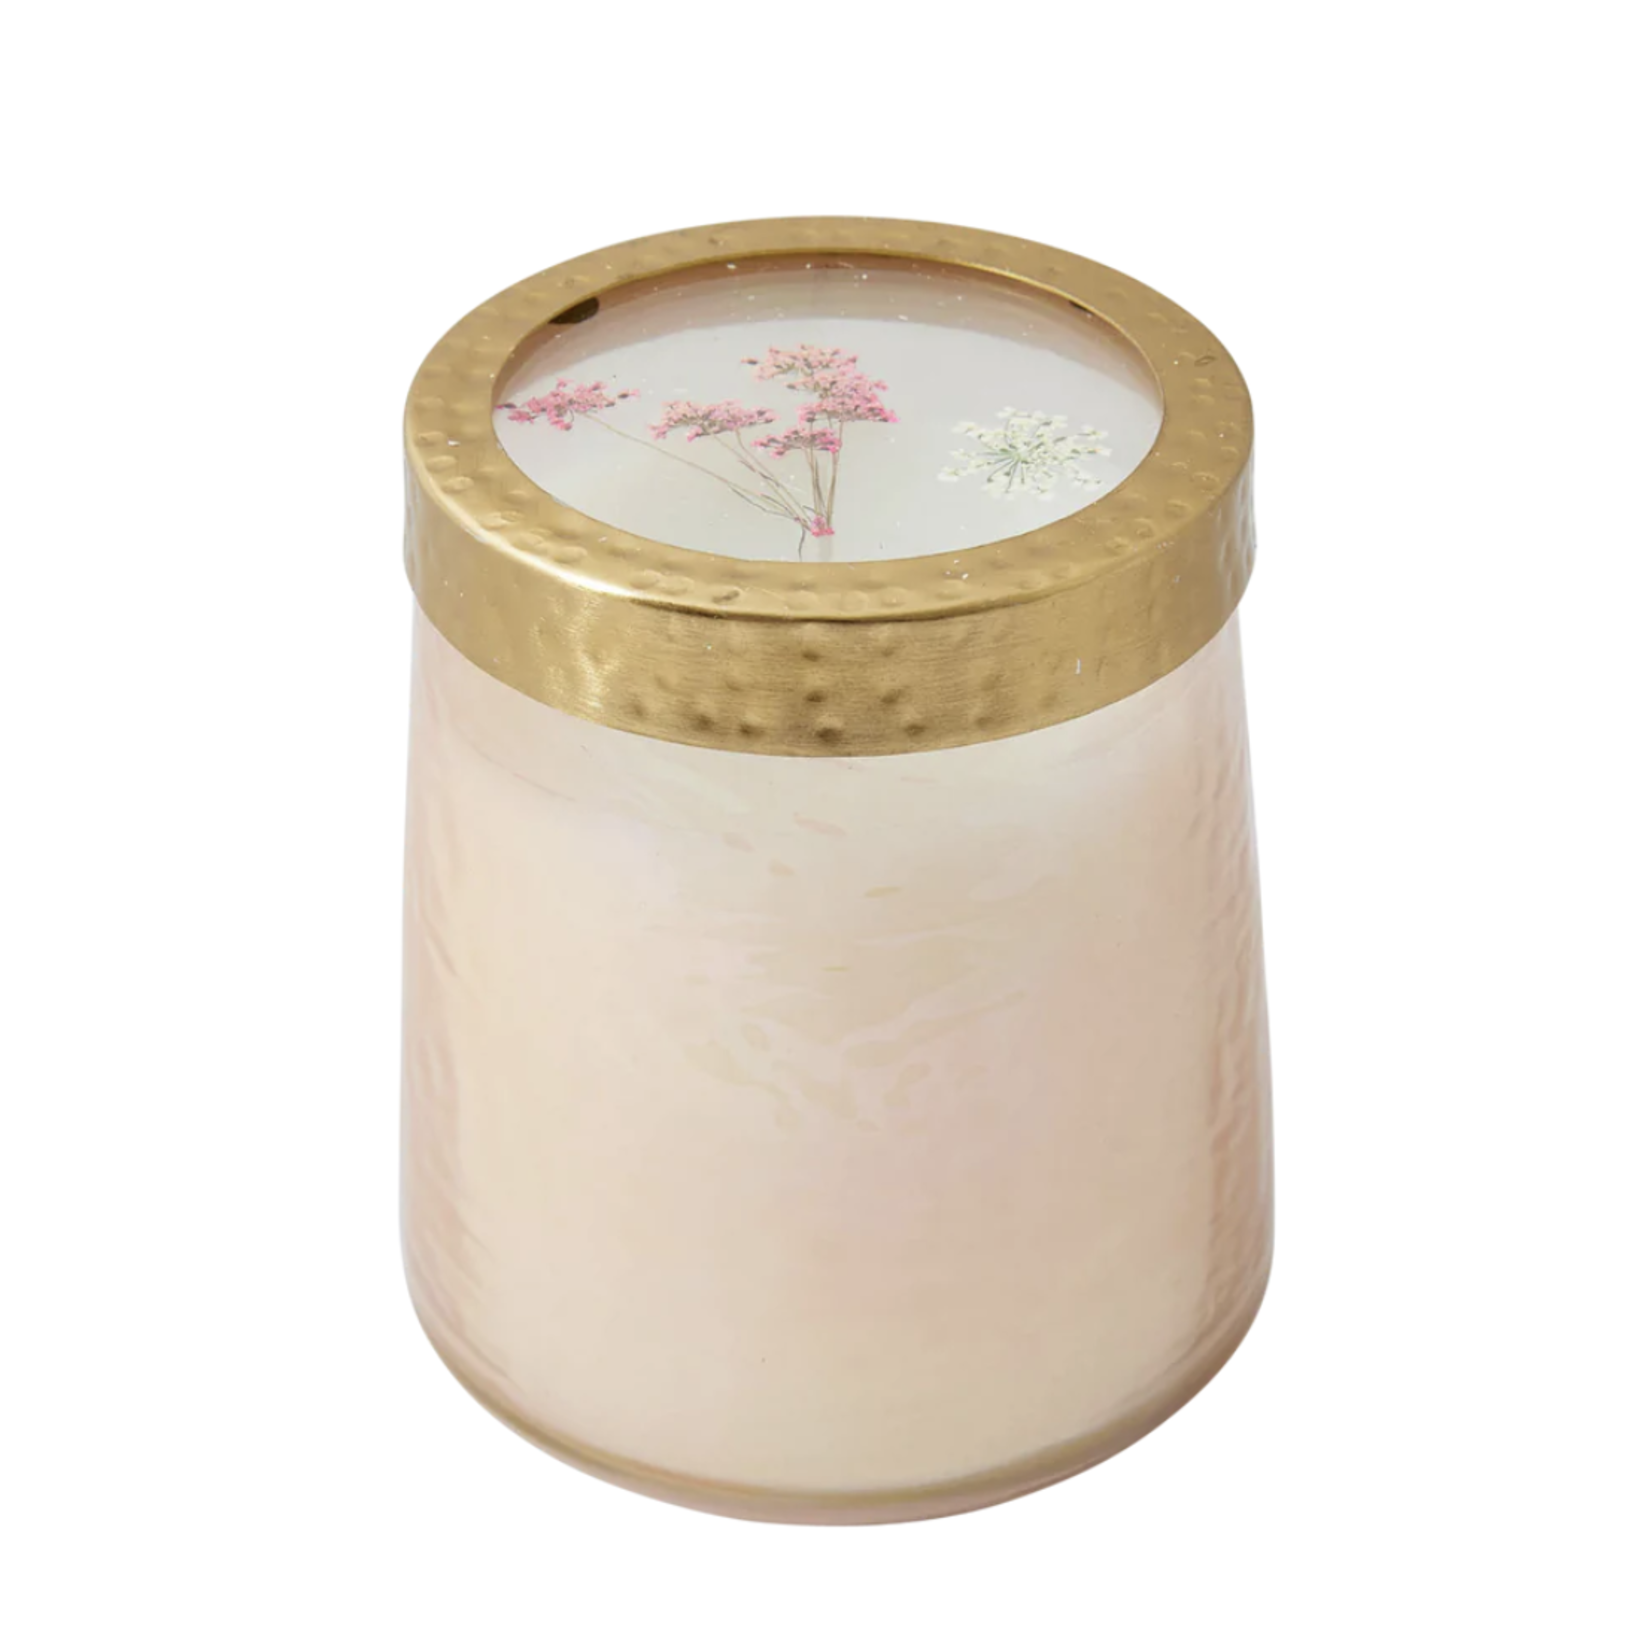 Lace Flower Medium Apricot Blossom Pressed Floral Candle